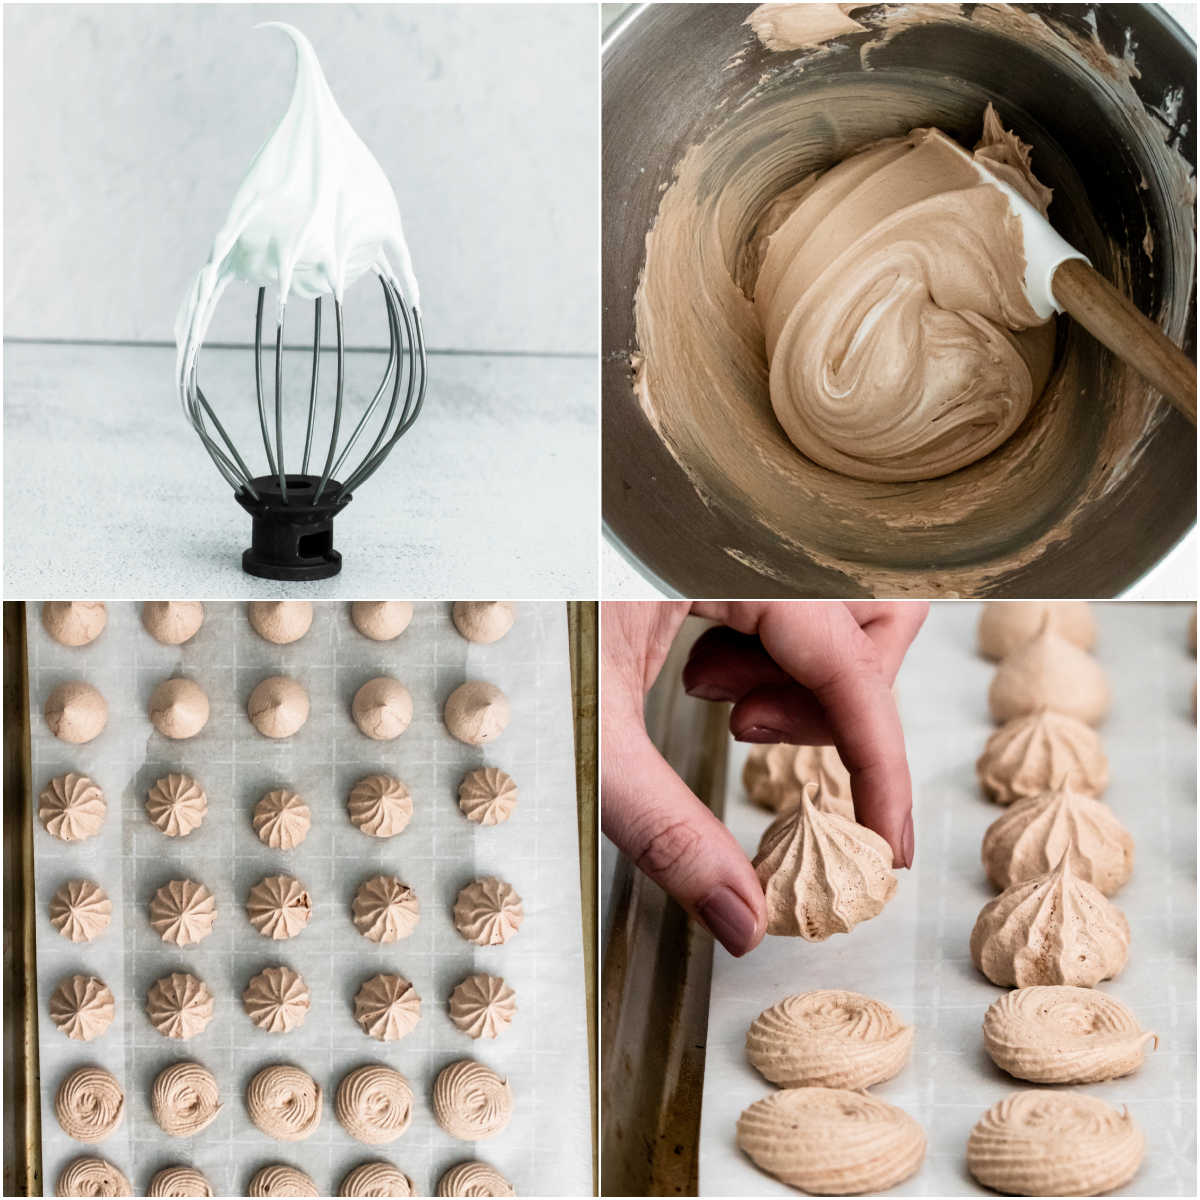 A picture collage of how to make Chocolate Meringues.